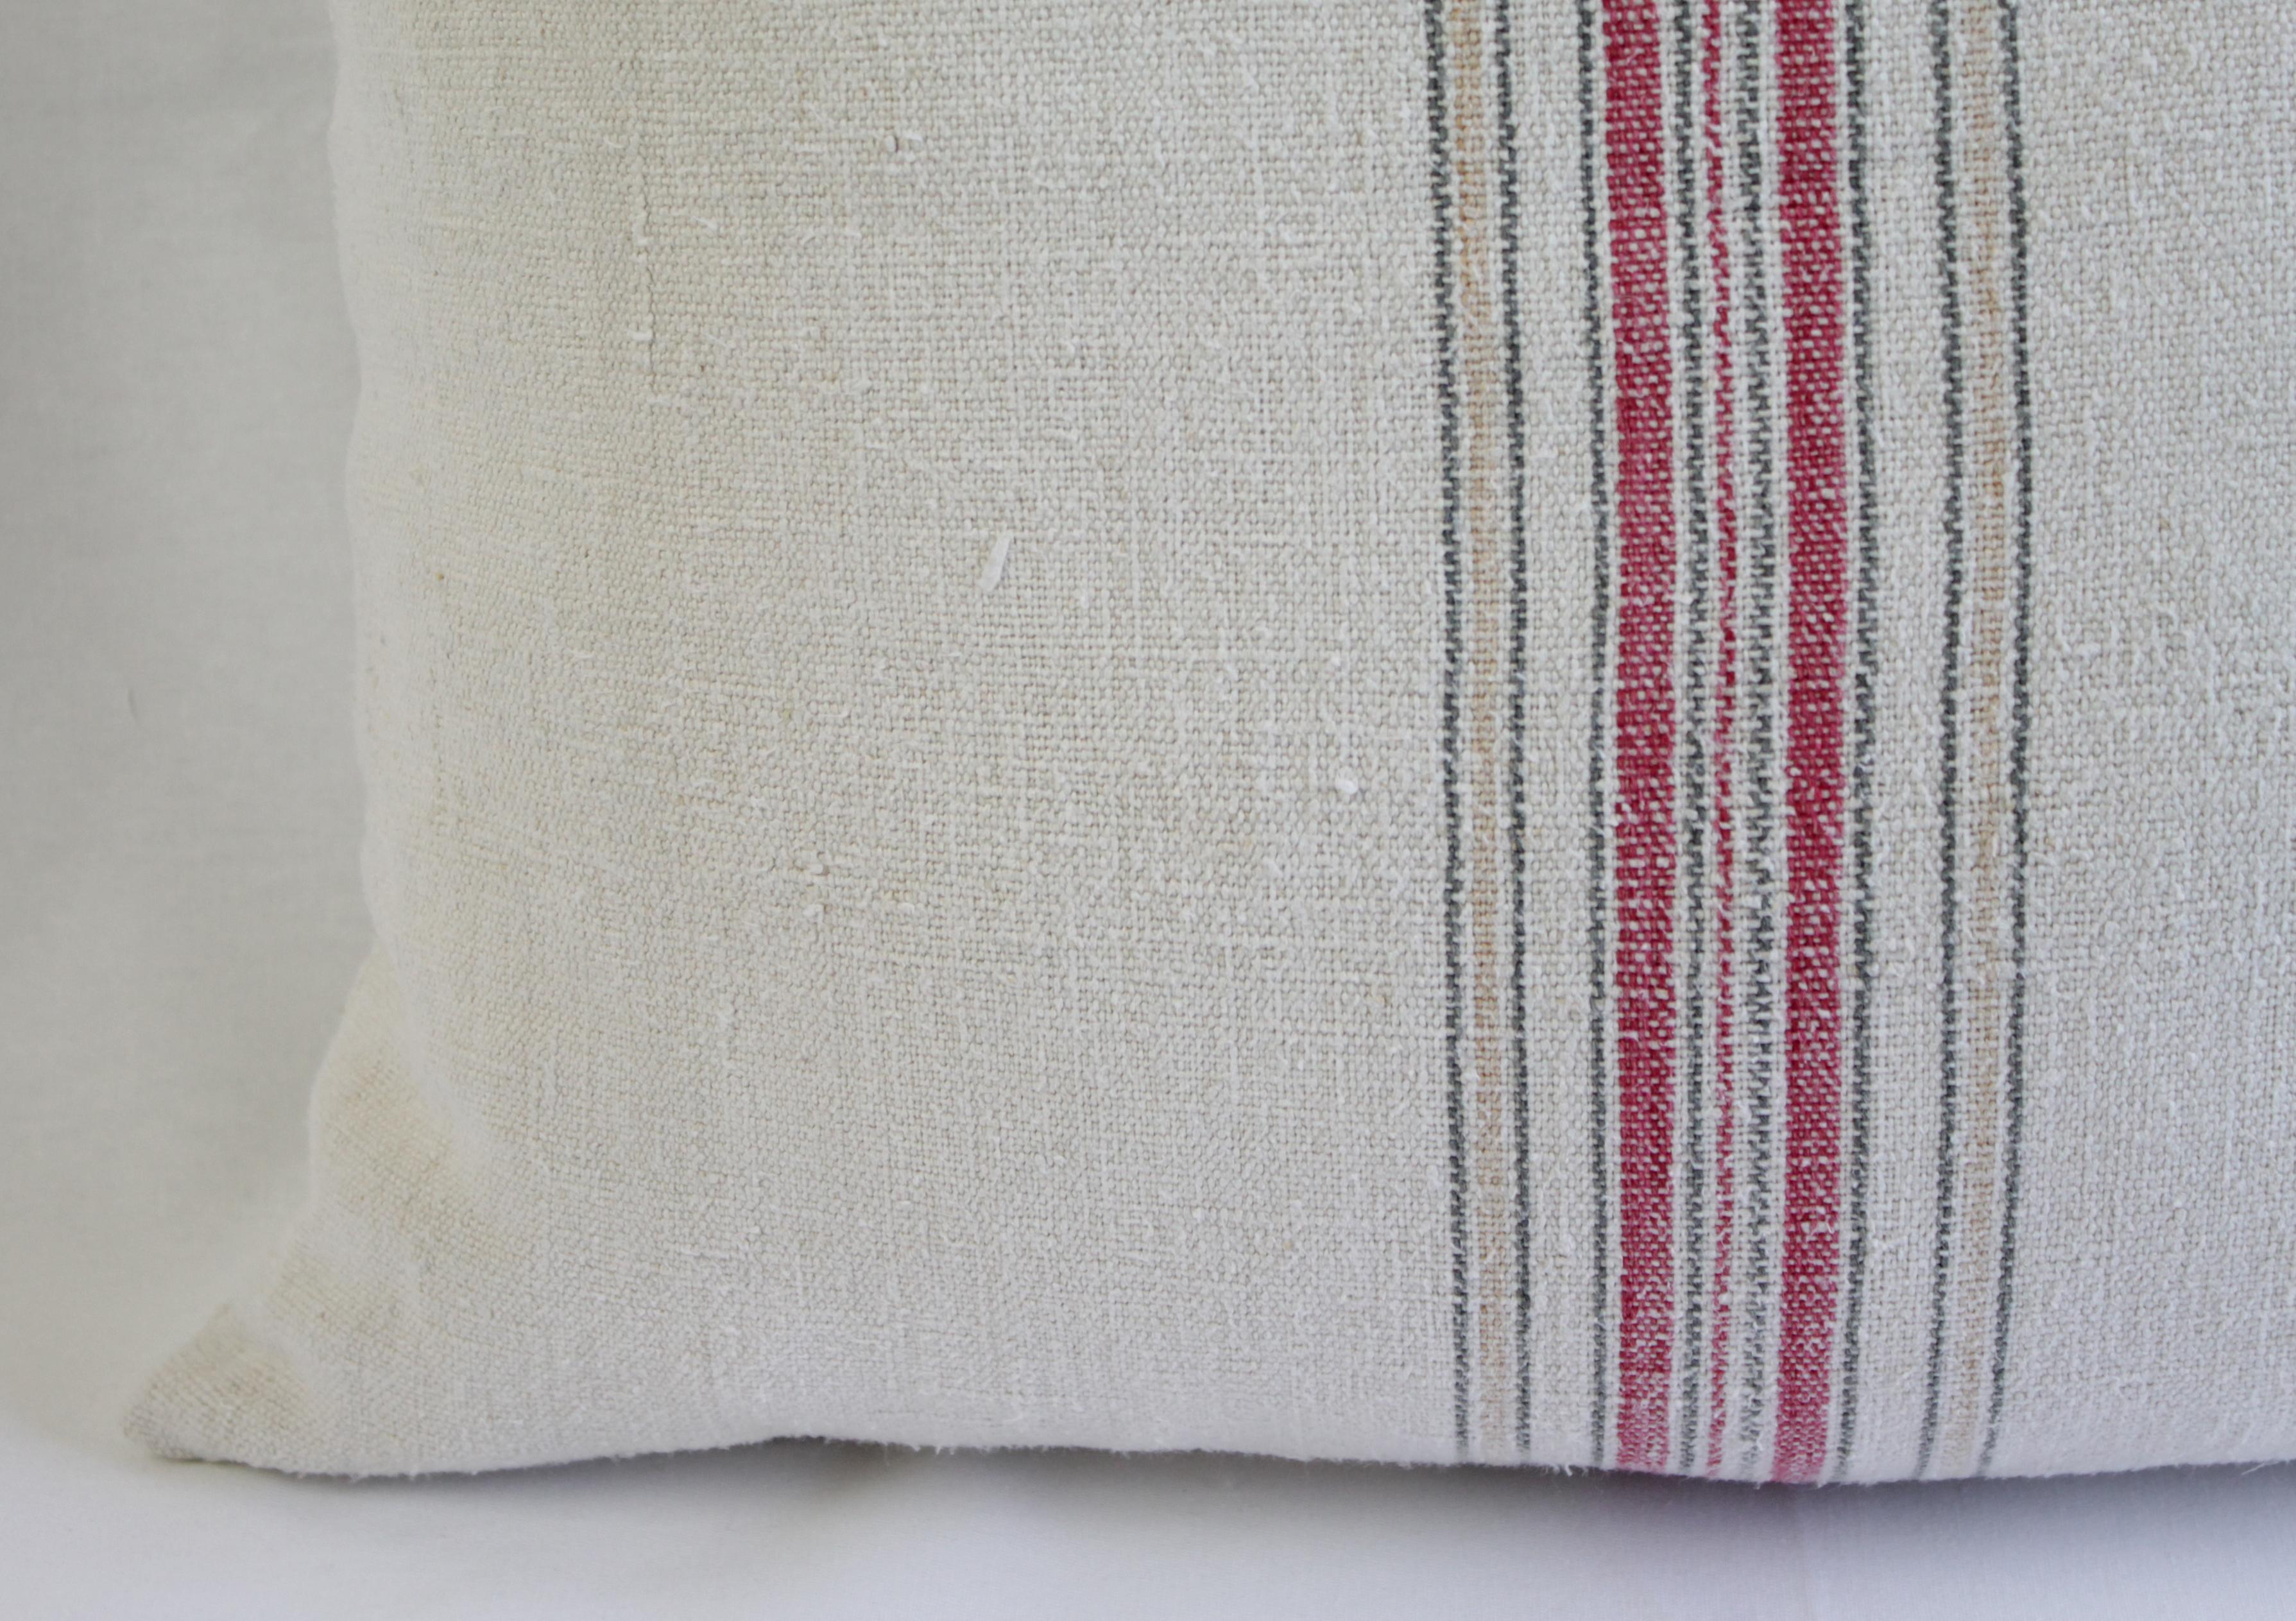 Antique Nubby 19th Century European Red and Tan Stripe with a Monogram Pillow 4